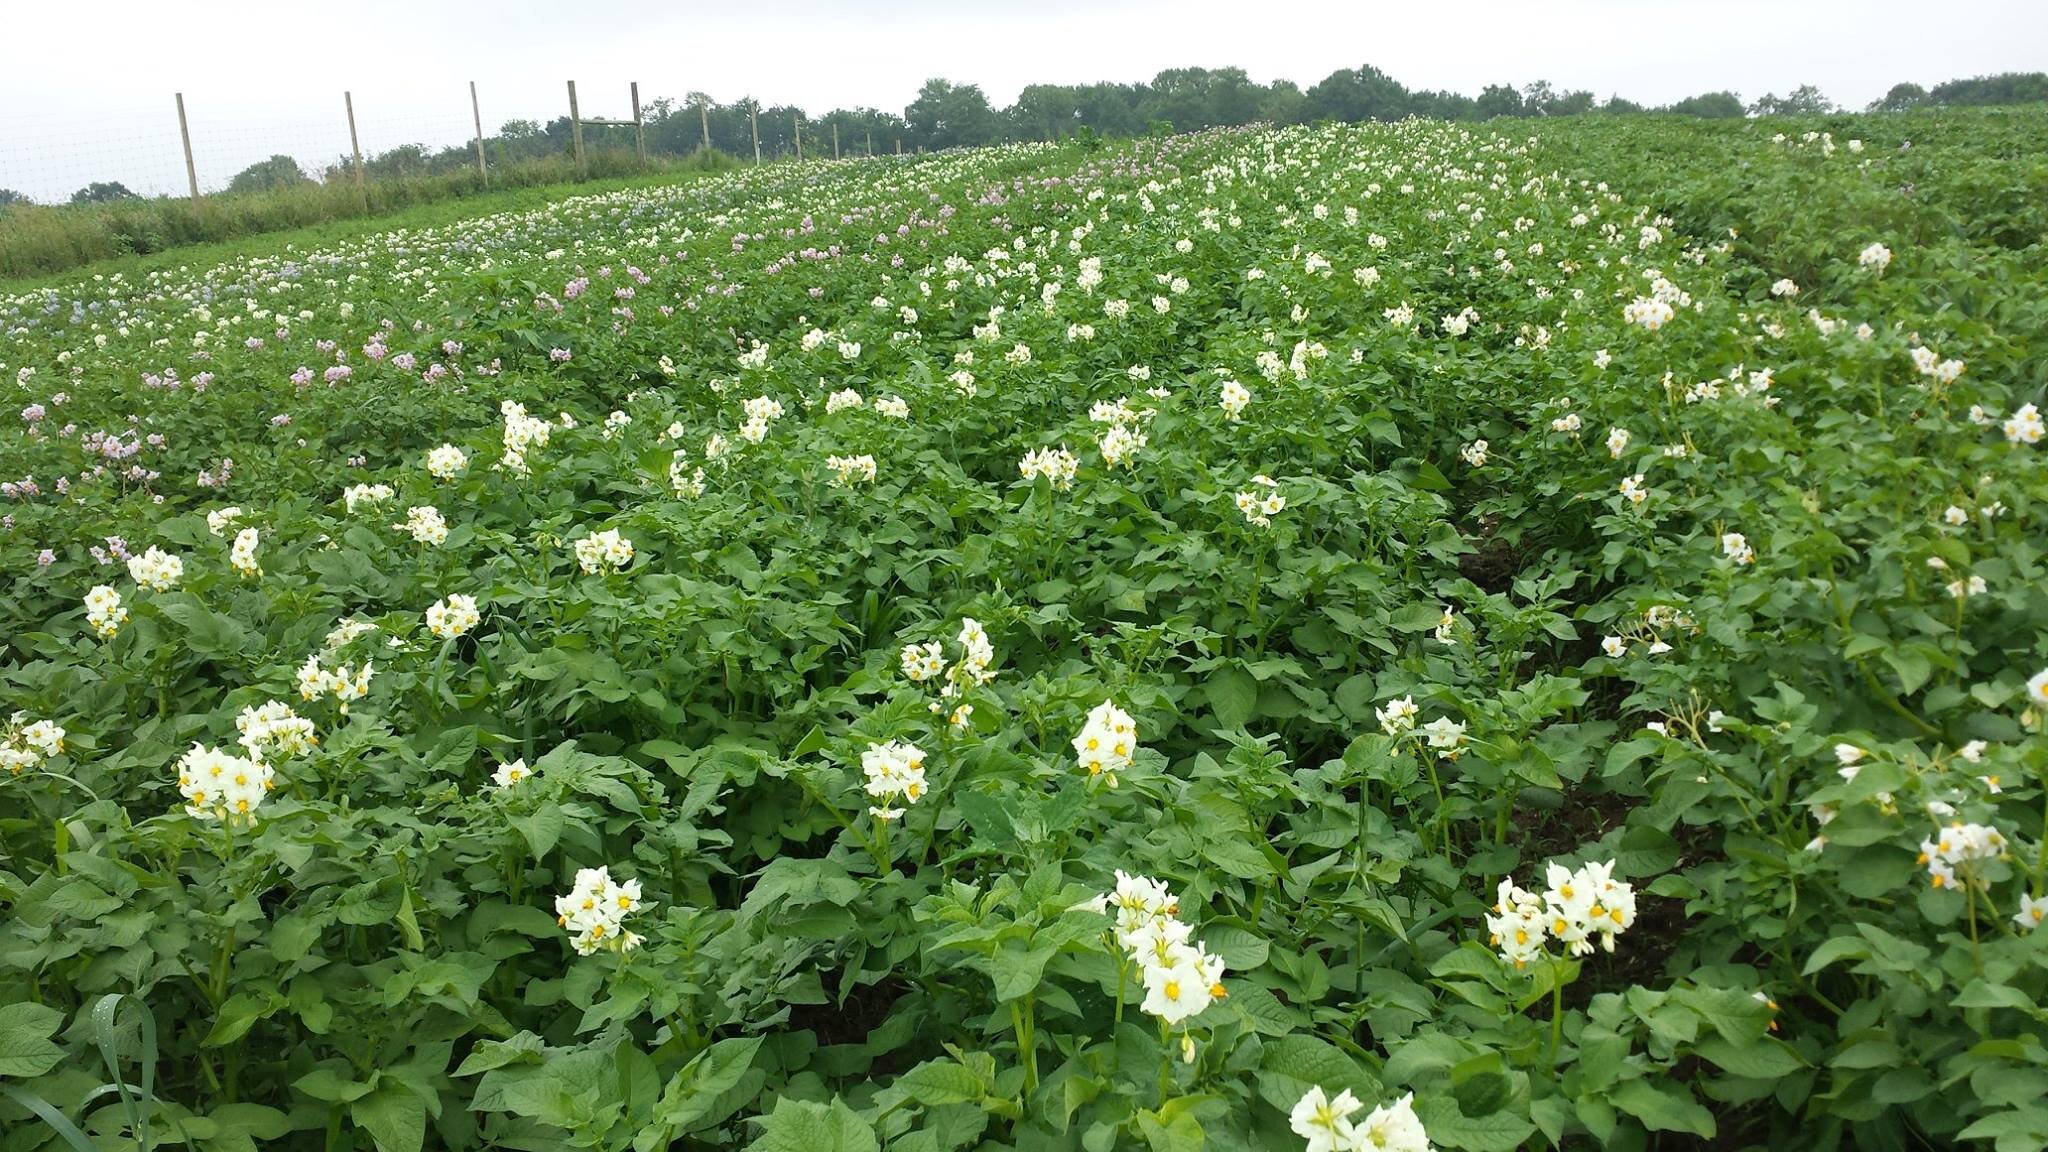 A field of potatoes with white flowers